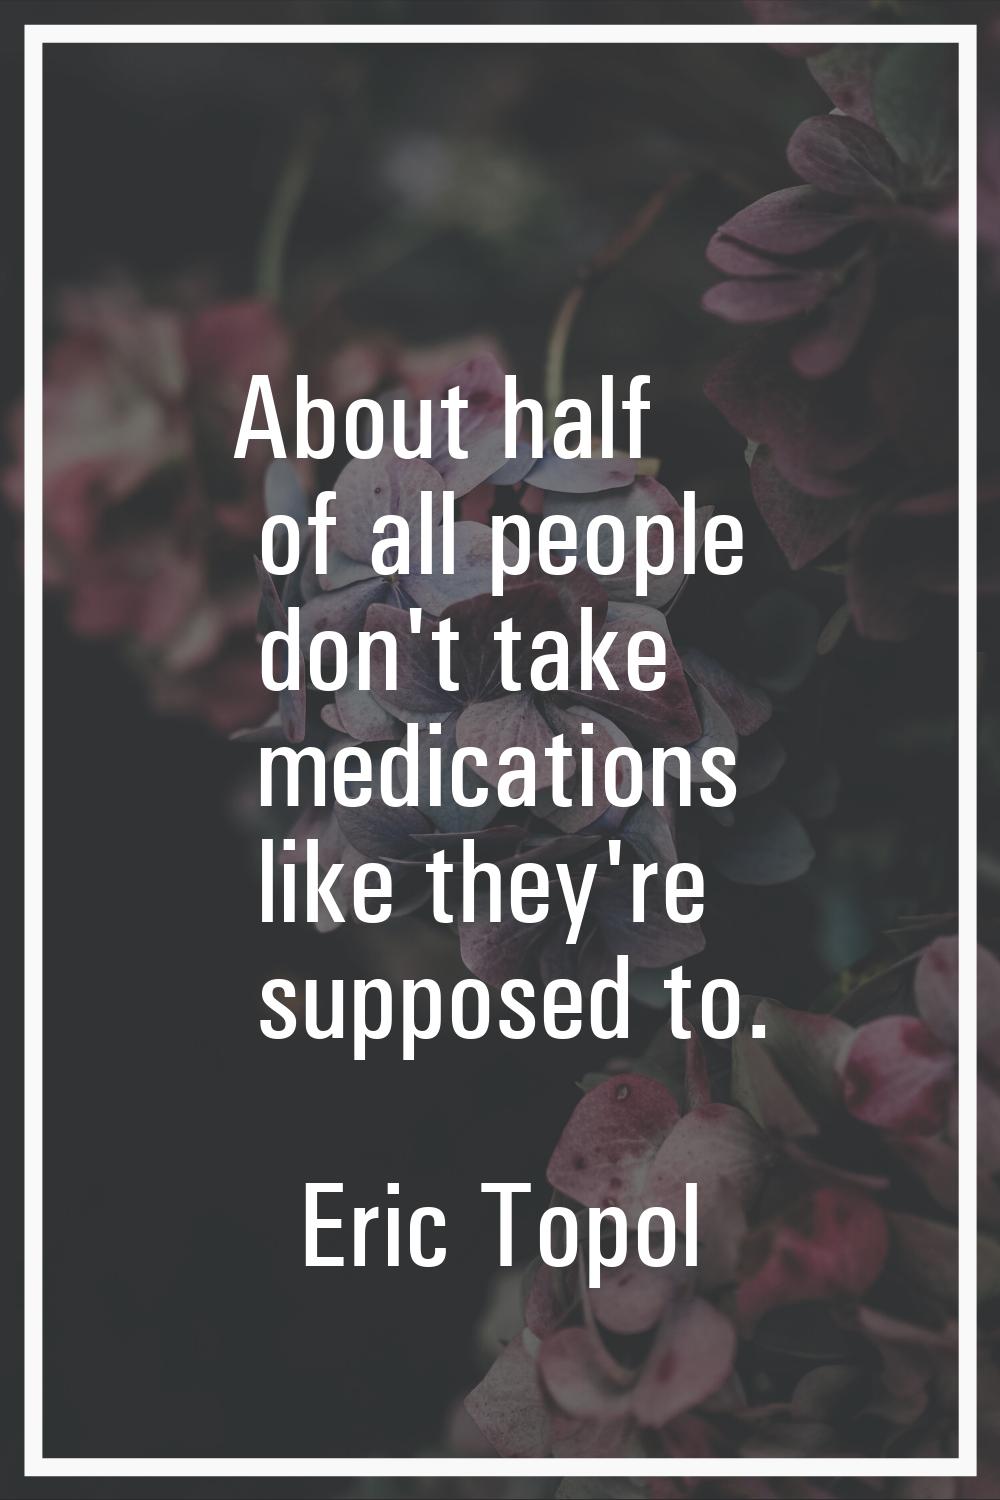 About half of all people don't take medications like they're supposed to.